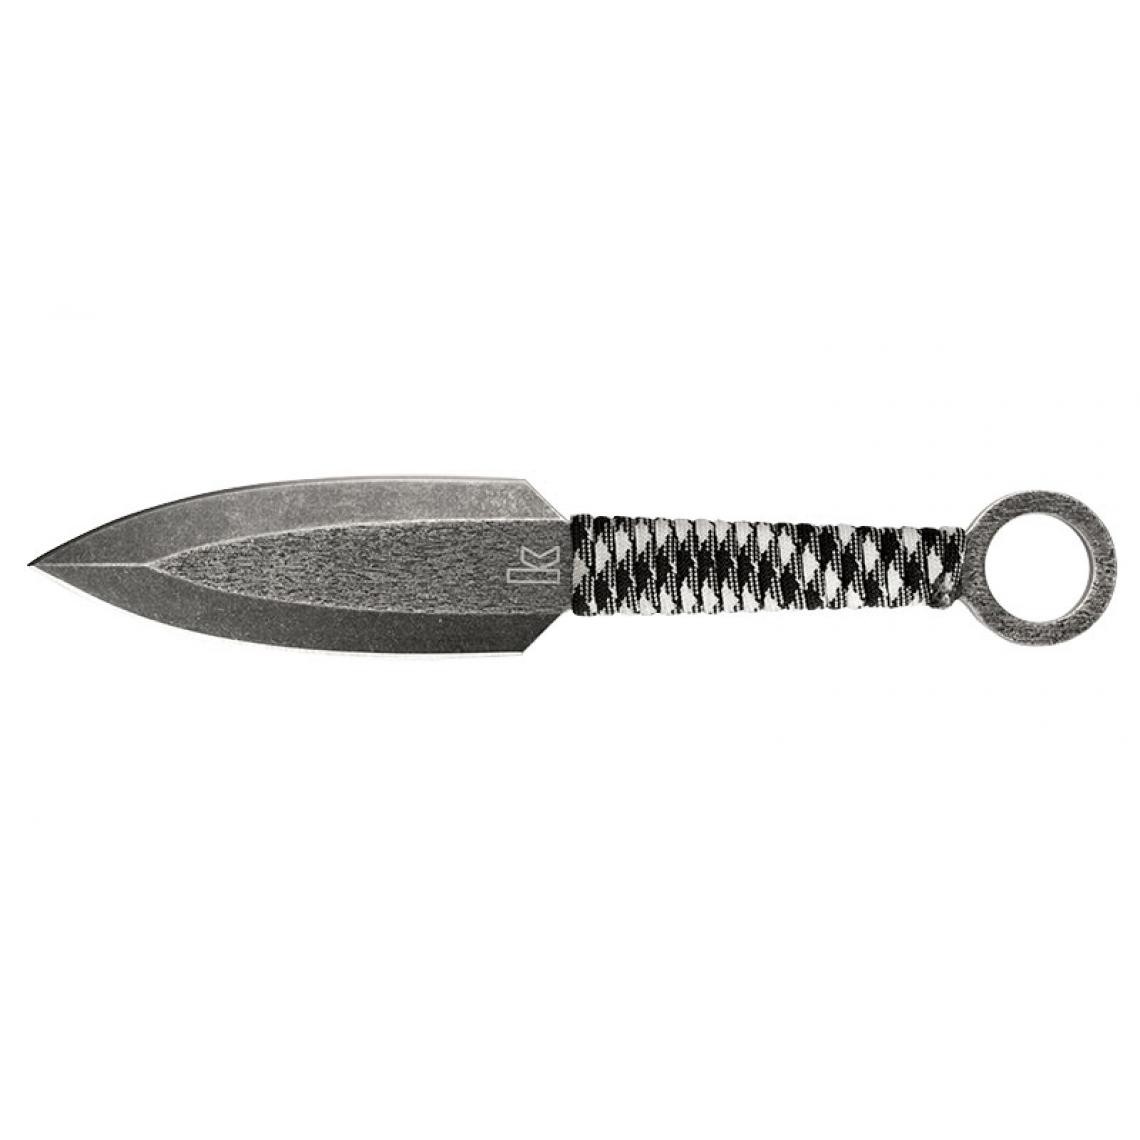 Divers Marques - KERSHAW - KW1747BW - ION - Outils de coupe